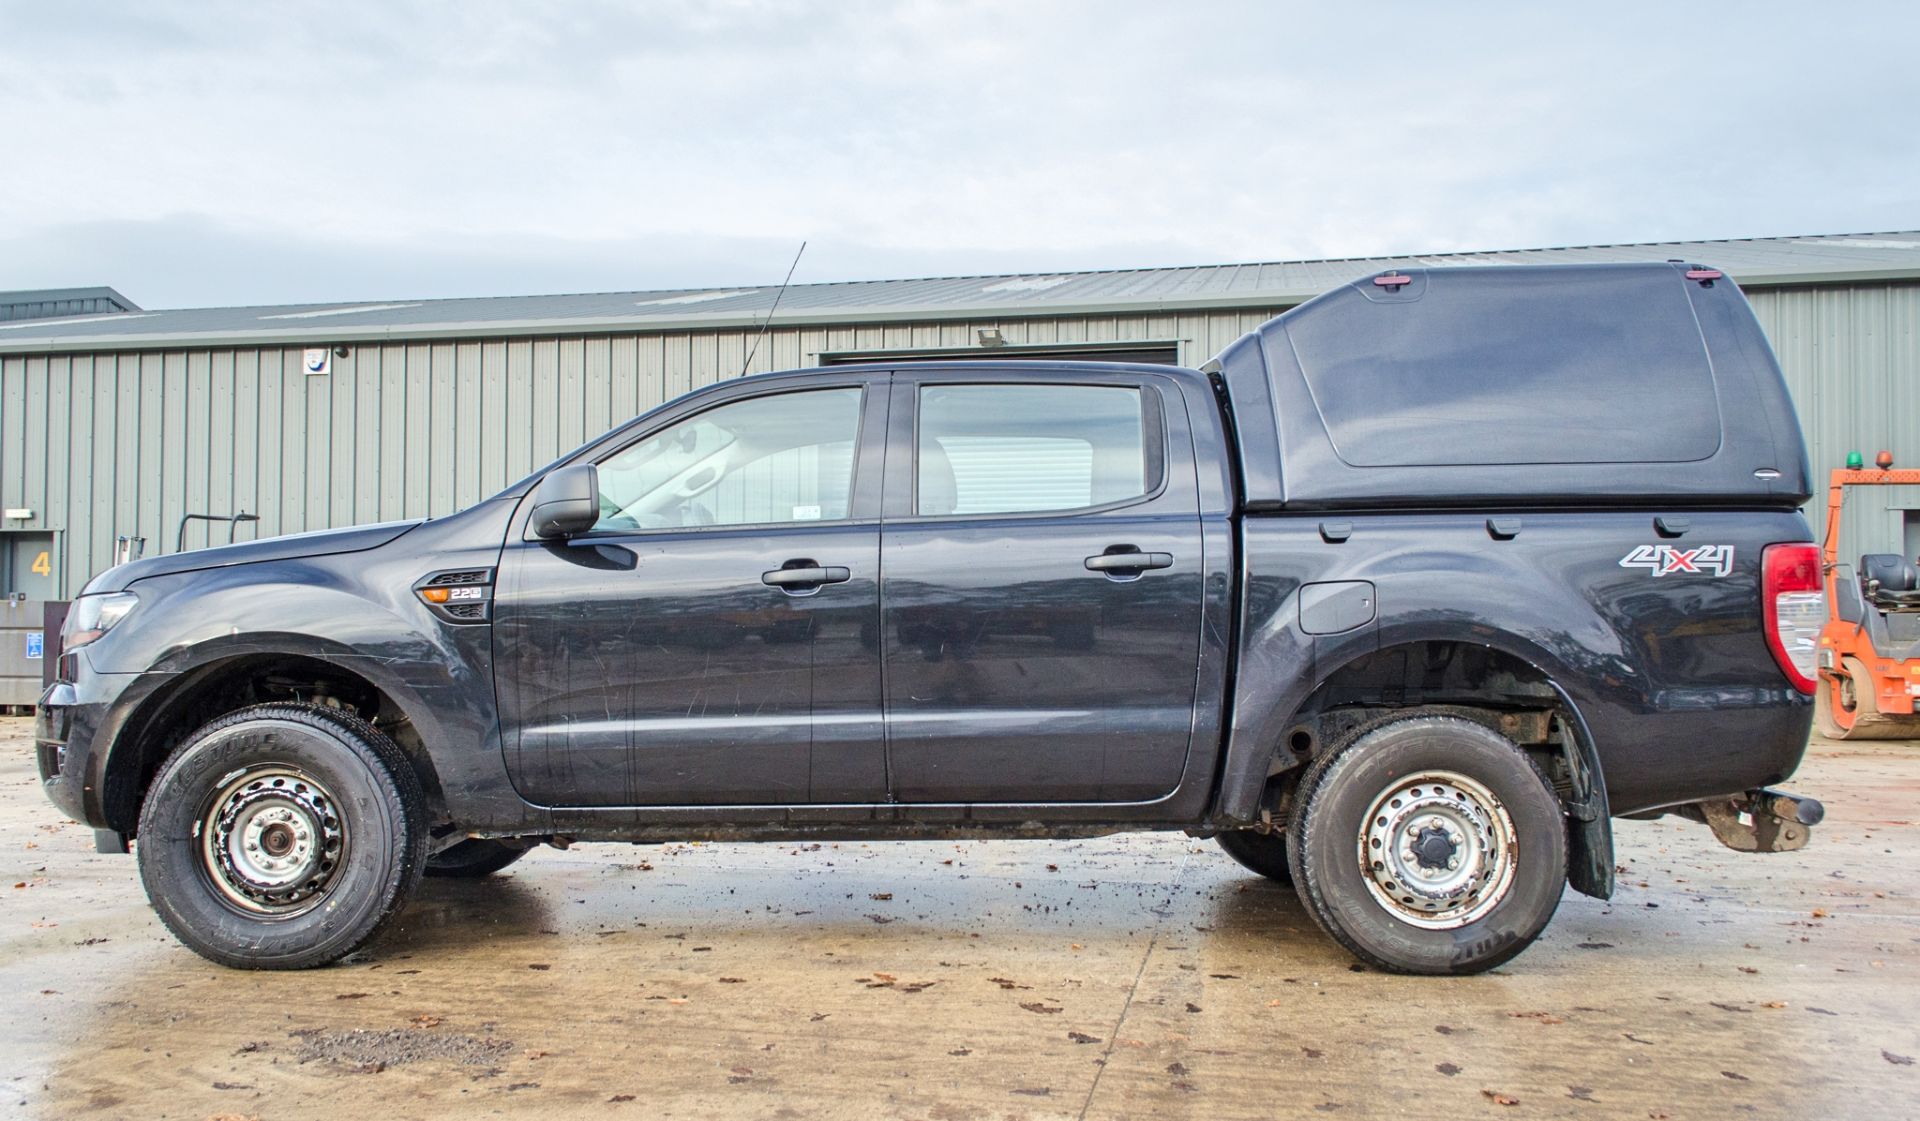 Ford Ranger 2.2 TDCI 160 XL double cab pick up (Ex MOD) VIN: 6FPPXXMJ2PHU42769 Date of Entry into - Image 7 of 33